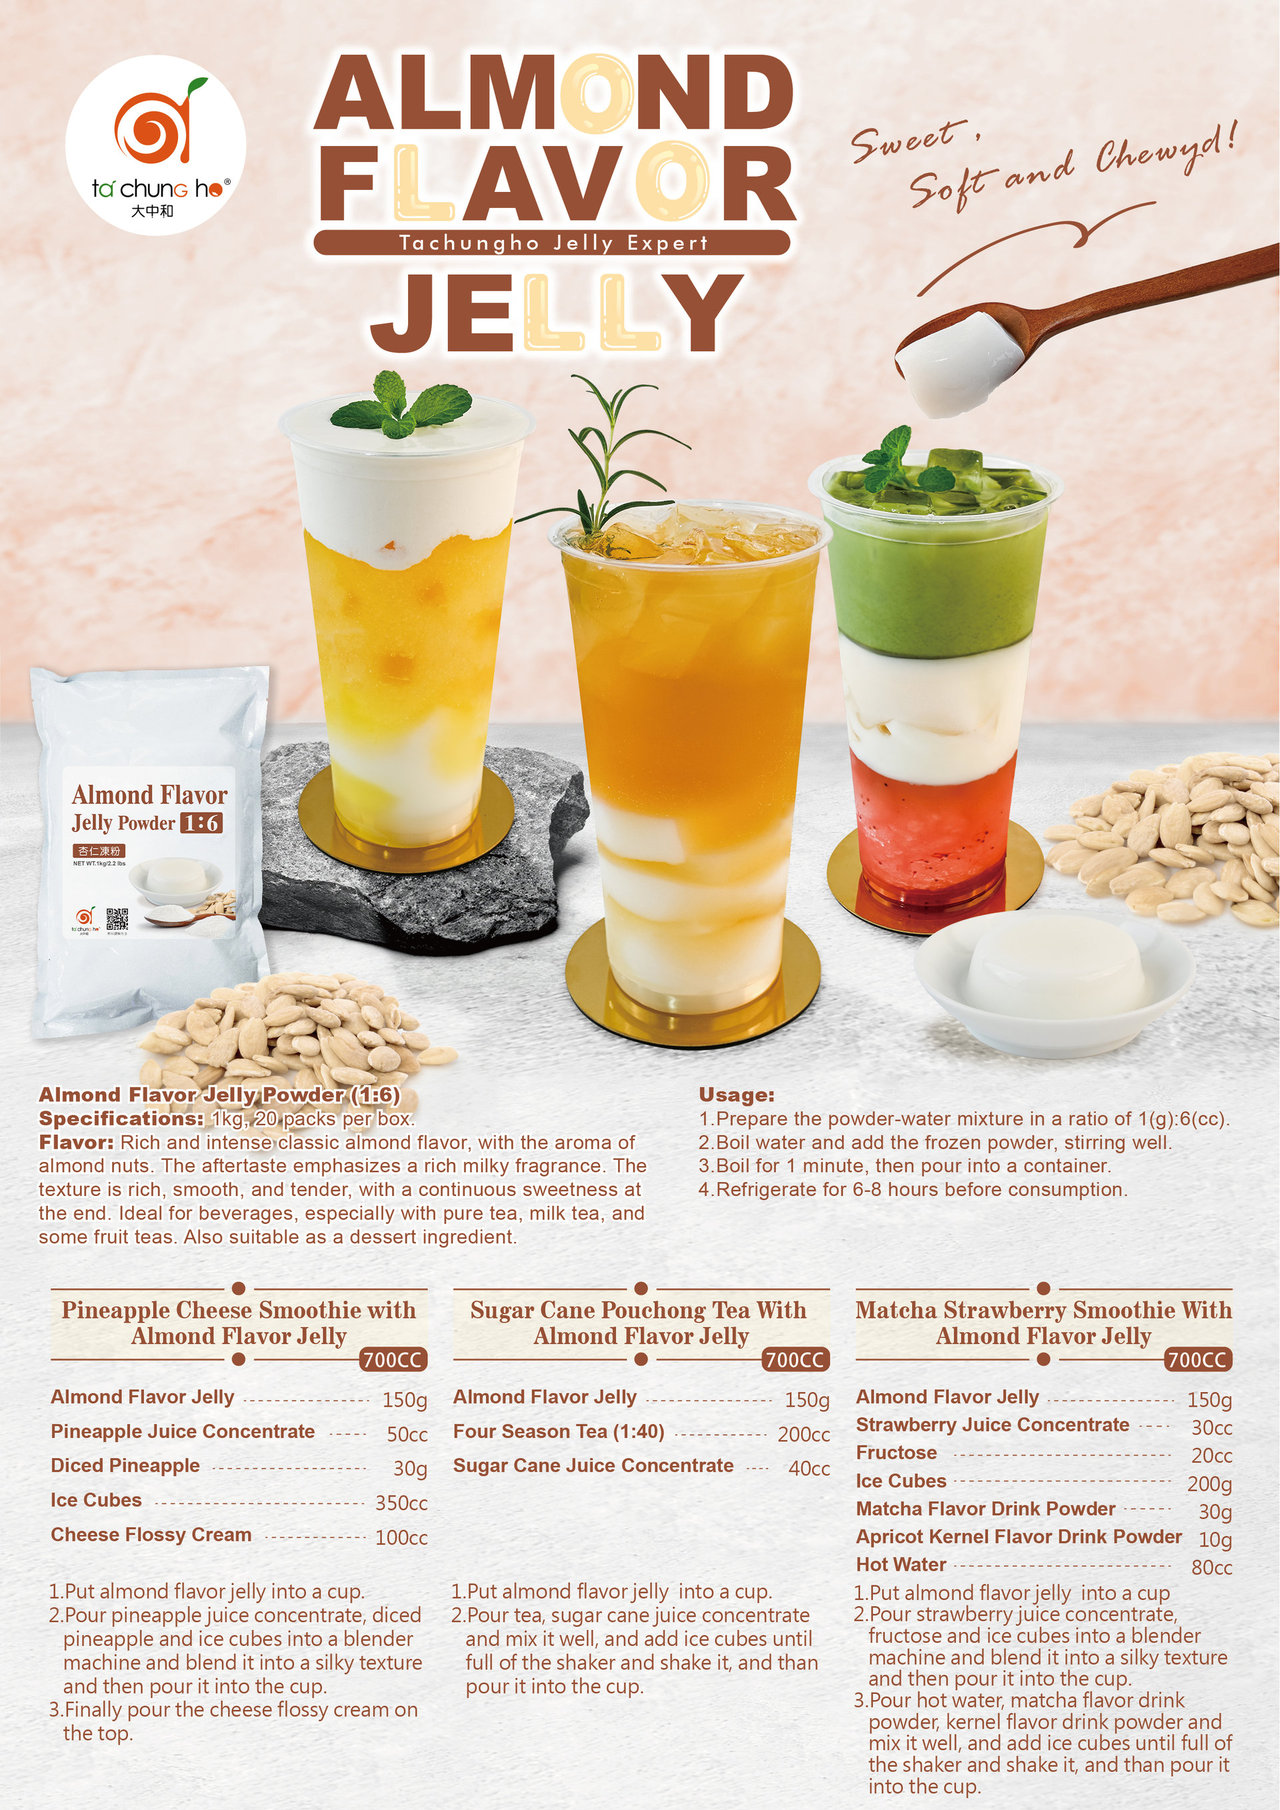 Sweet, Soft and Chewy - Almond Jelly